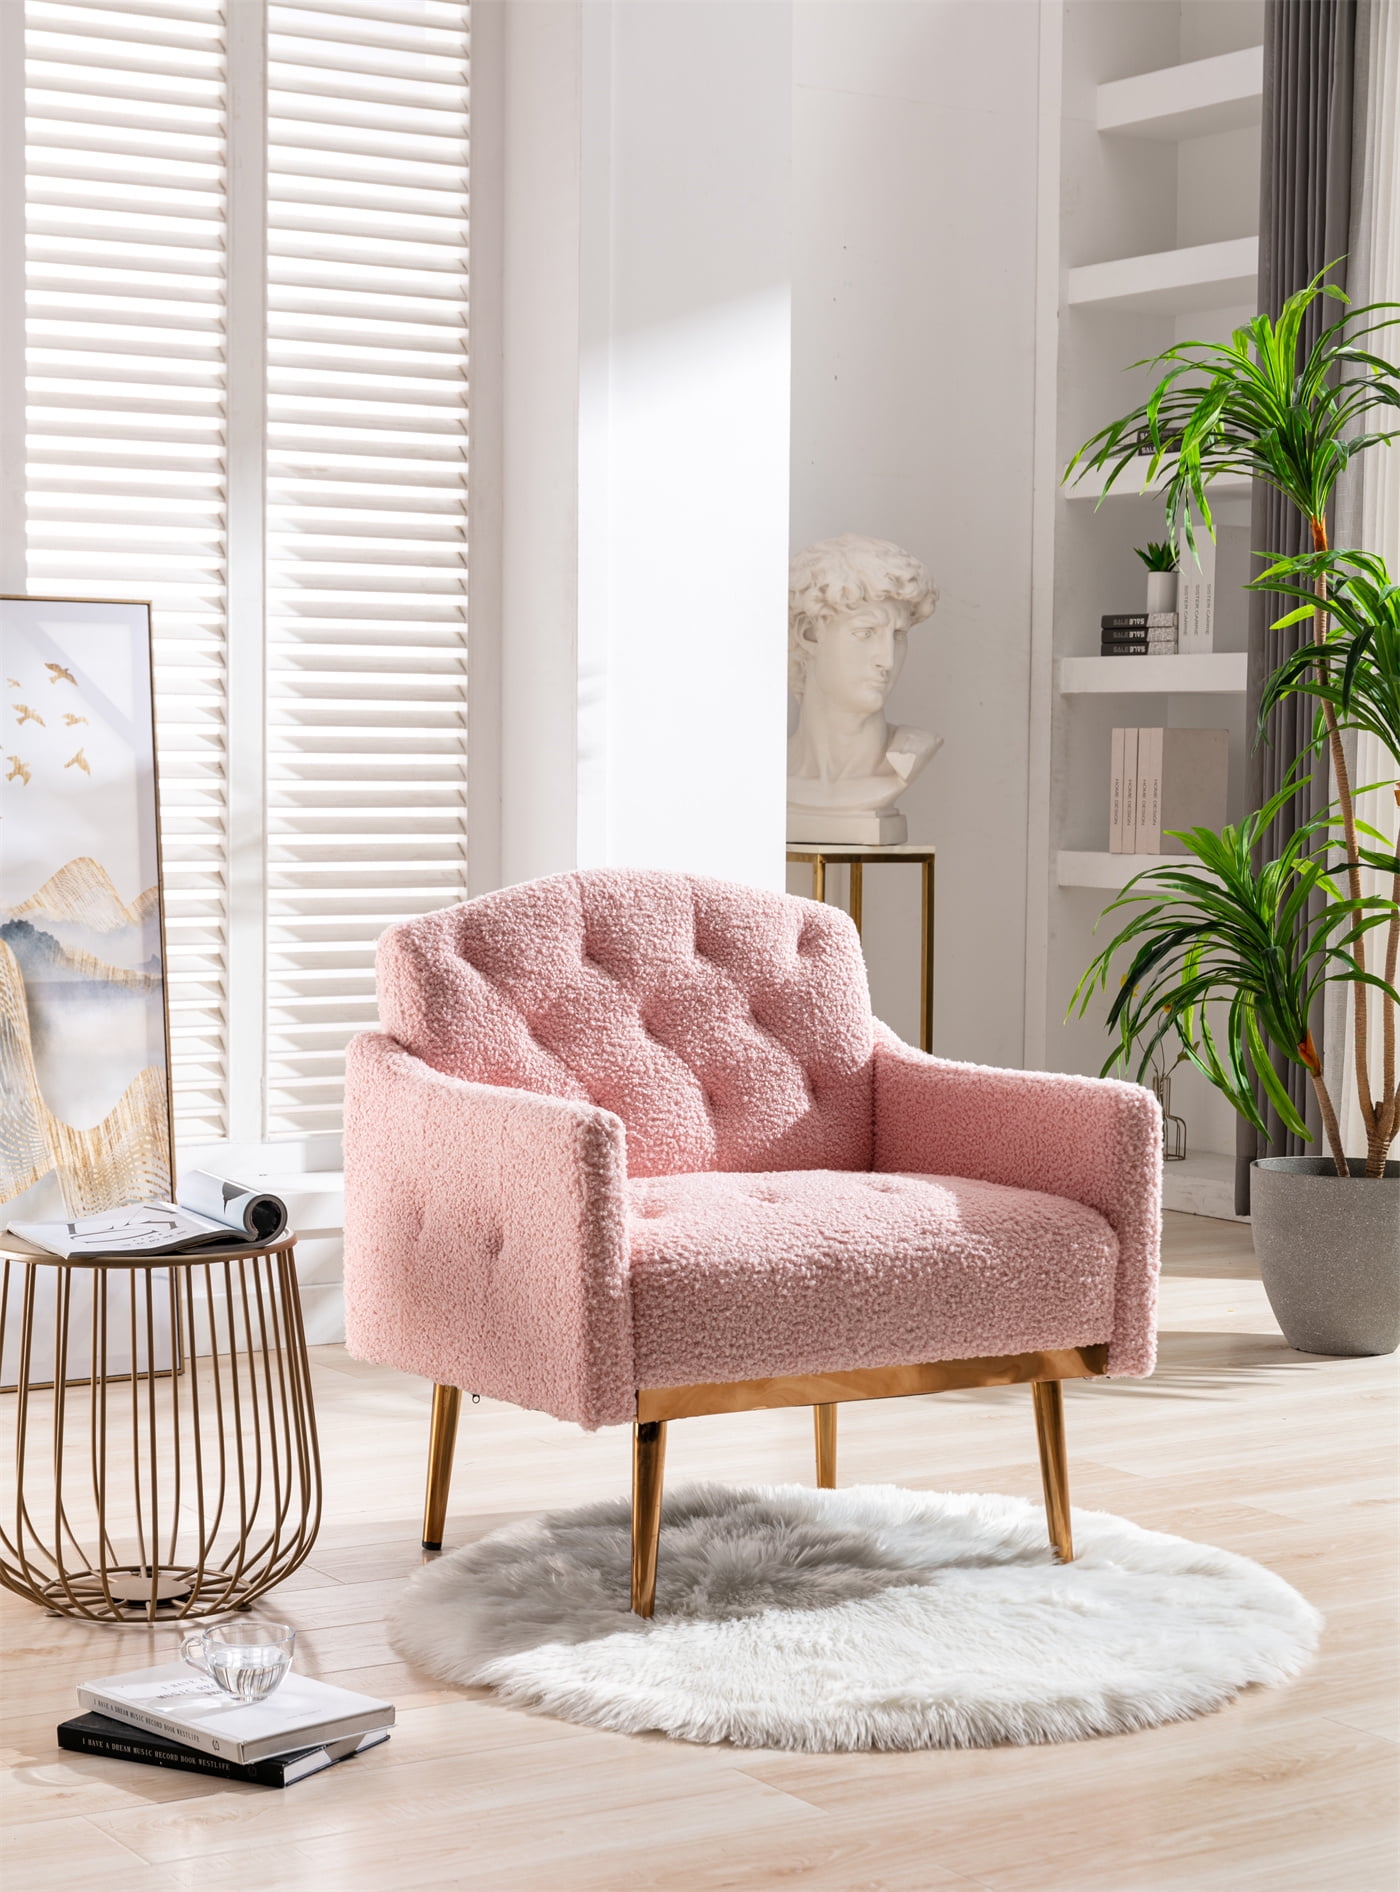 Modern Accent Chair for Living Room, Teddy Fabric Upholstered Armchair,  Vanity Chair with Rose Golden Metal Feet Bedroom, Pink 